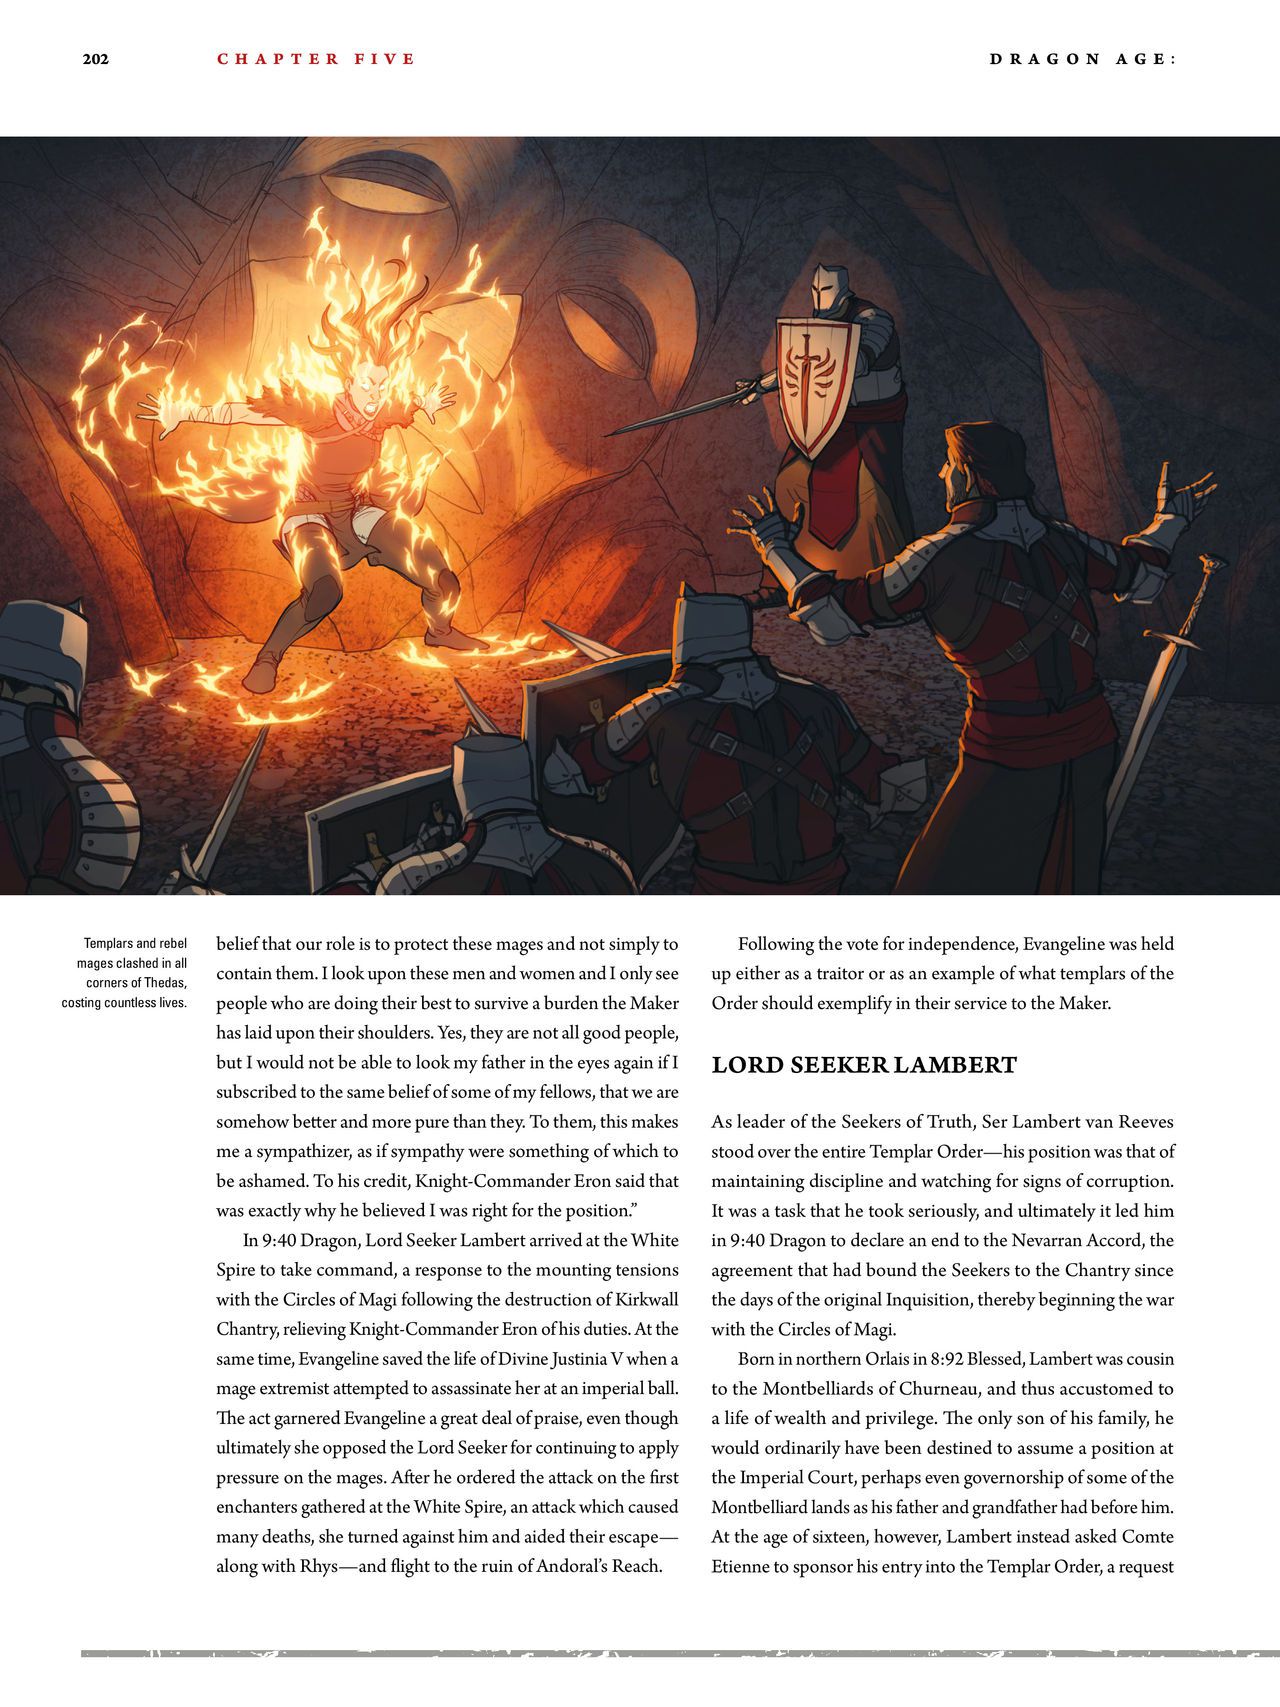 Dragon Age - The World of Thedas v02 197